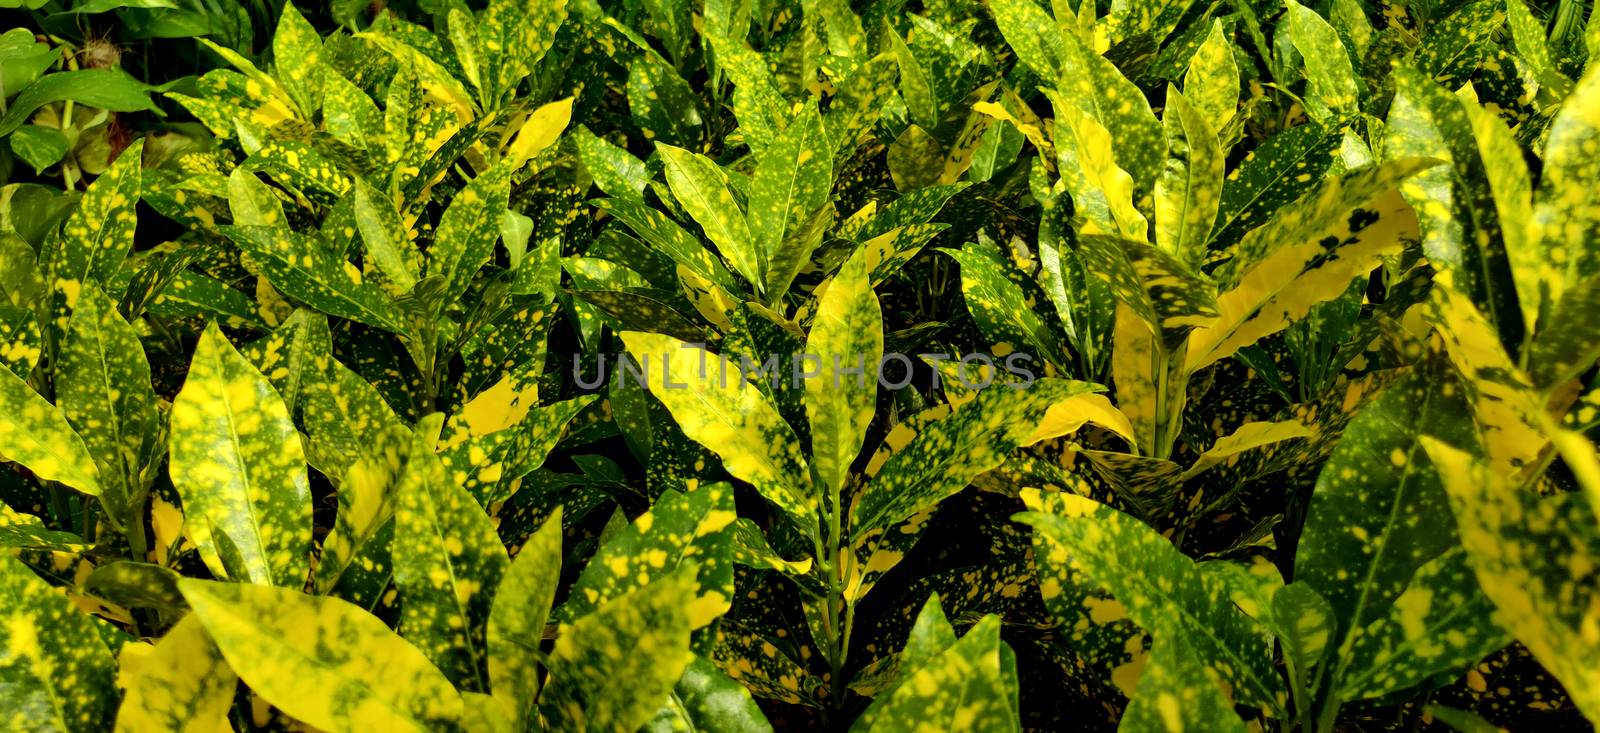 A close look at the Japanese laurel plants in a nursery inside the plant nursery in New Delhi, India